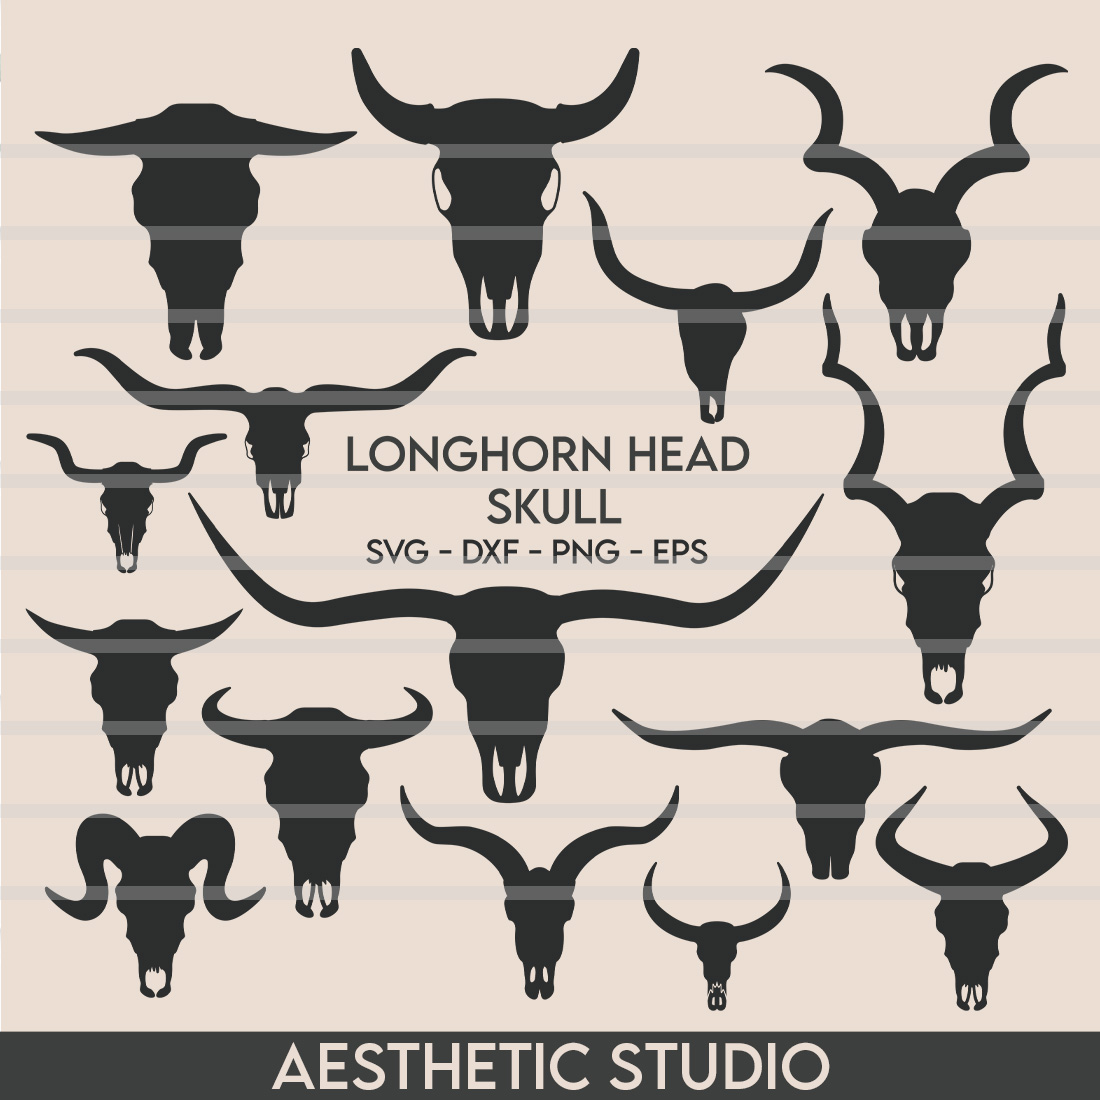 Longhorn Head Skull SVG, Longhorn Head Skull, Longhorn Head Svg, Cow Skull, Clipart, Bull Skull, Silhouette, Vector cover image.